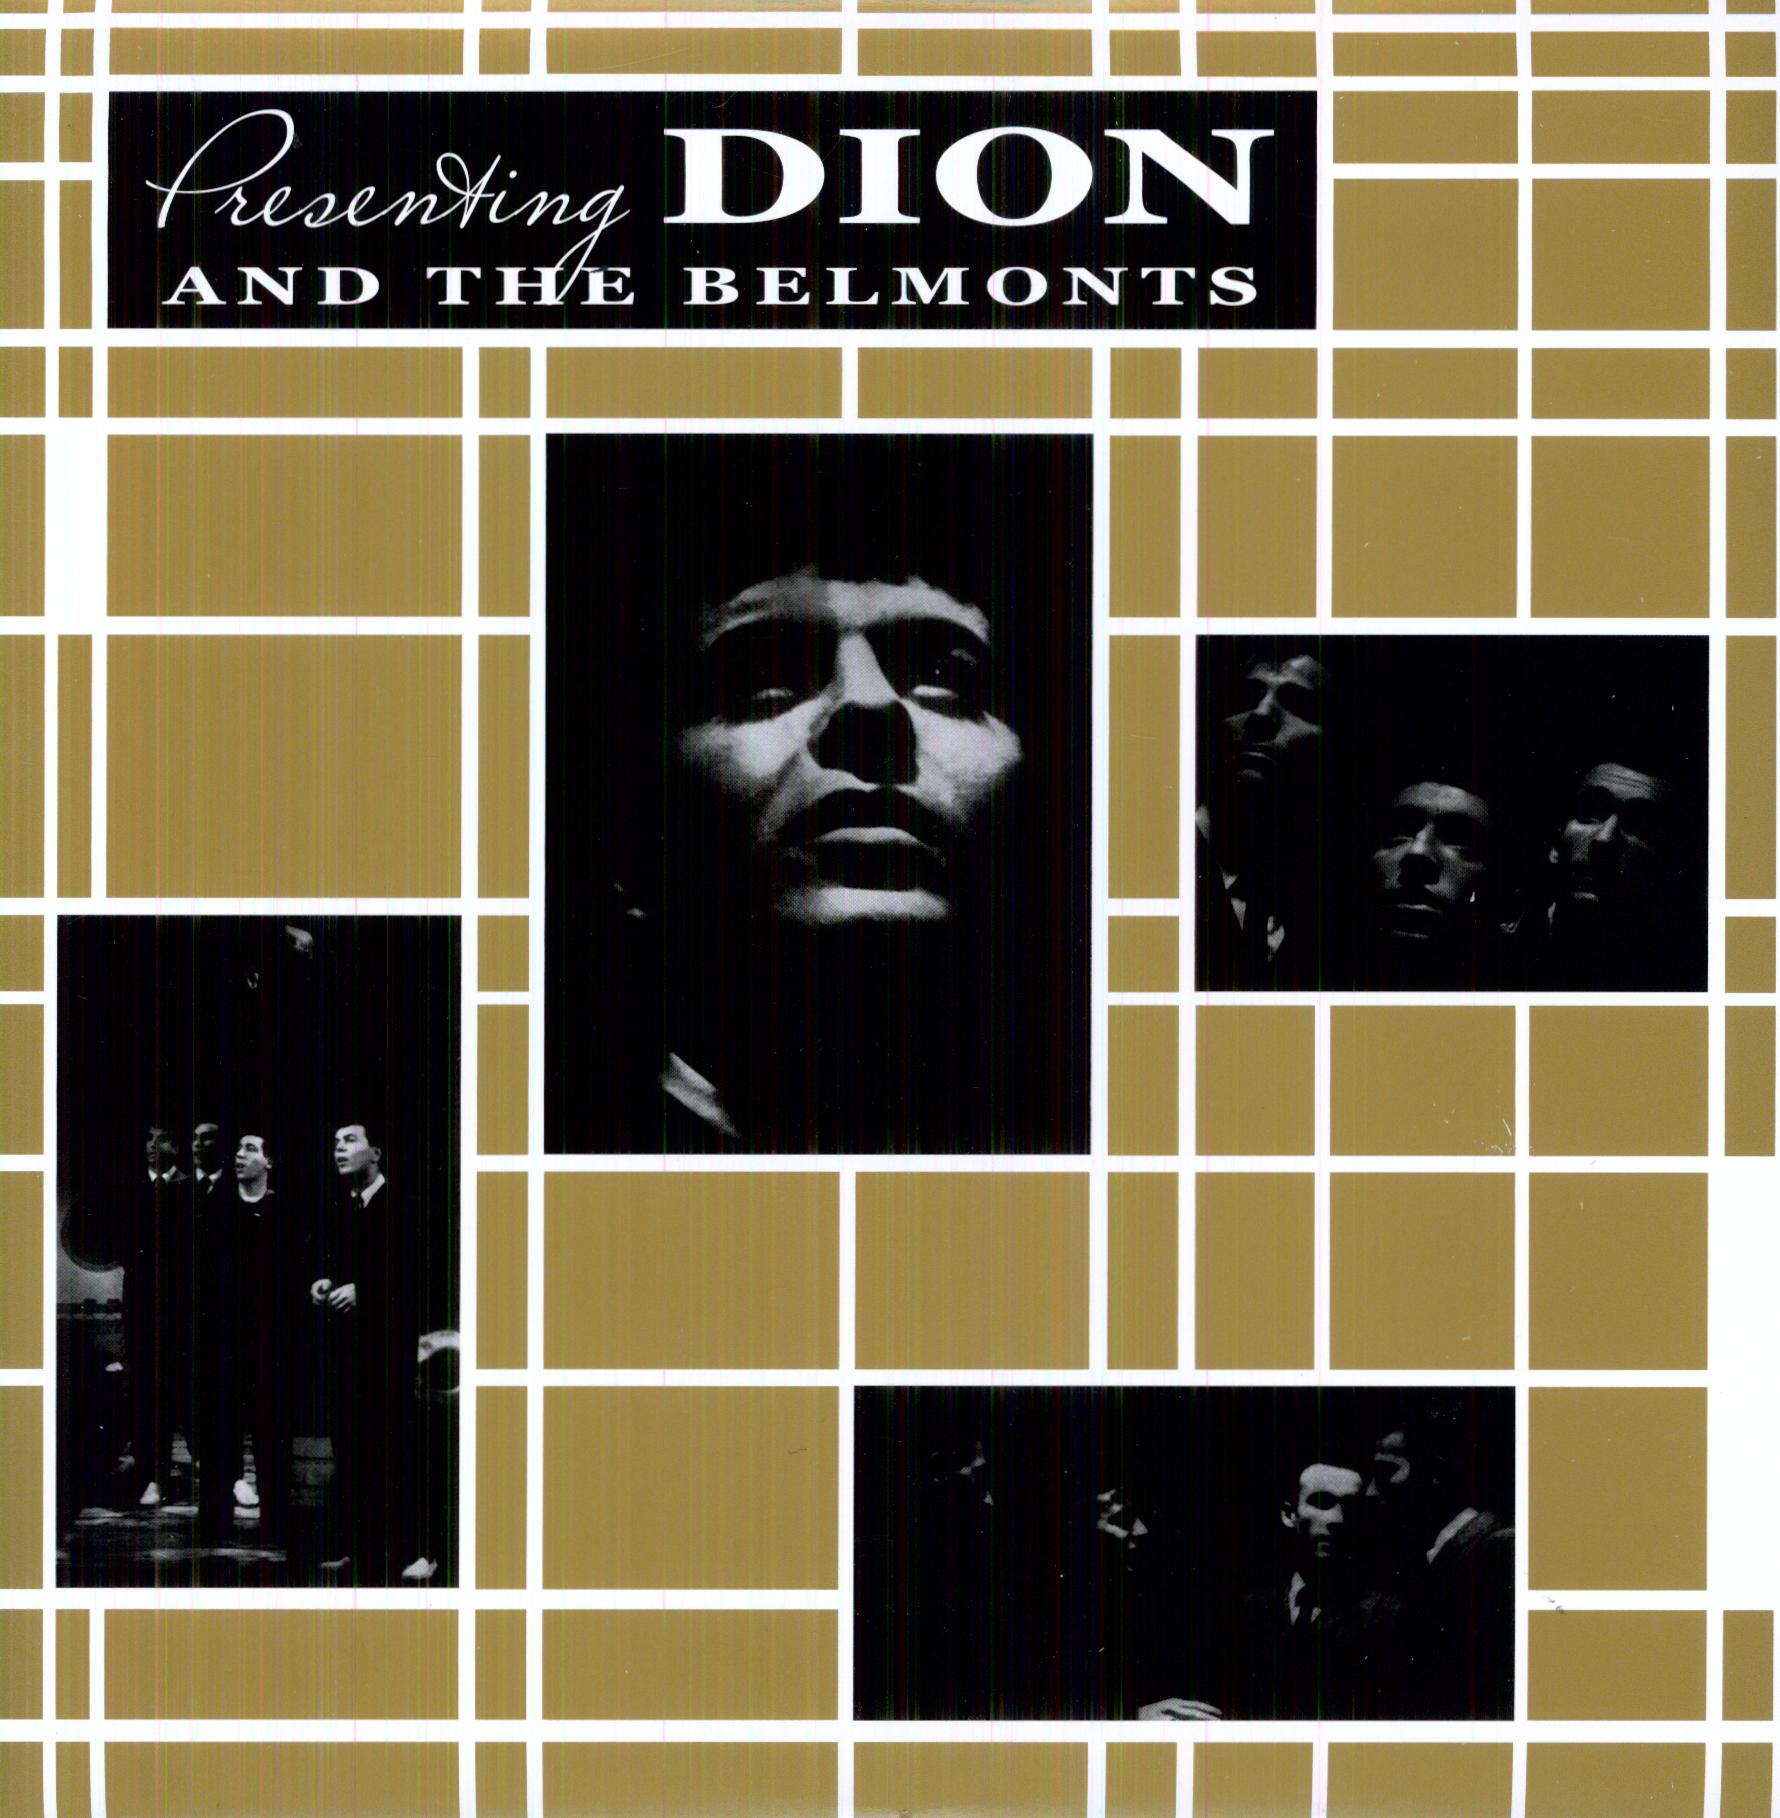 PRESENTING DION & THE BELMONTS